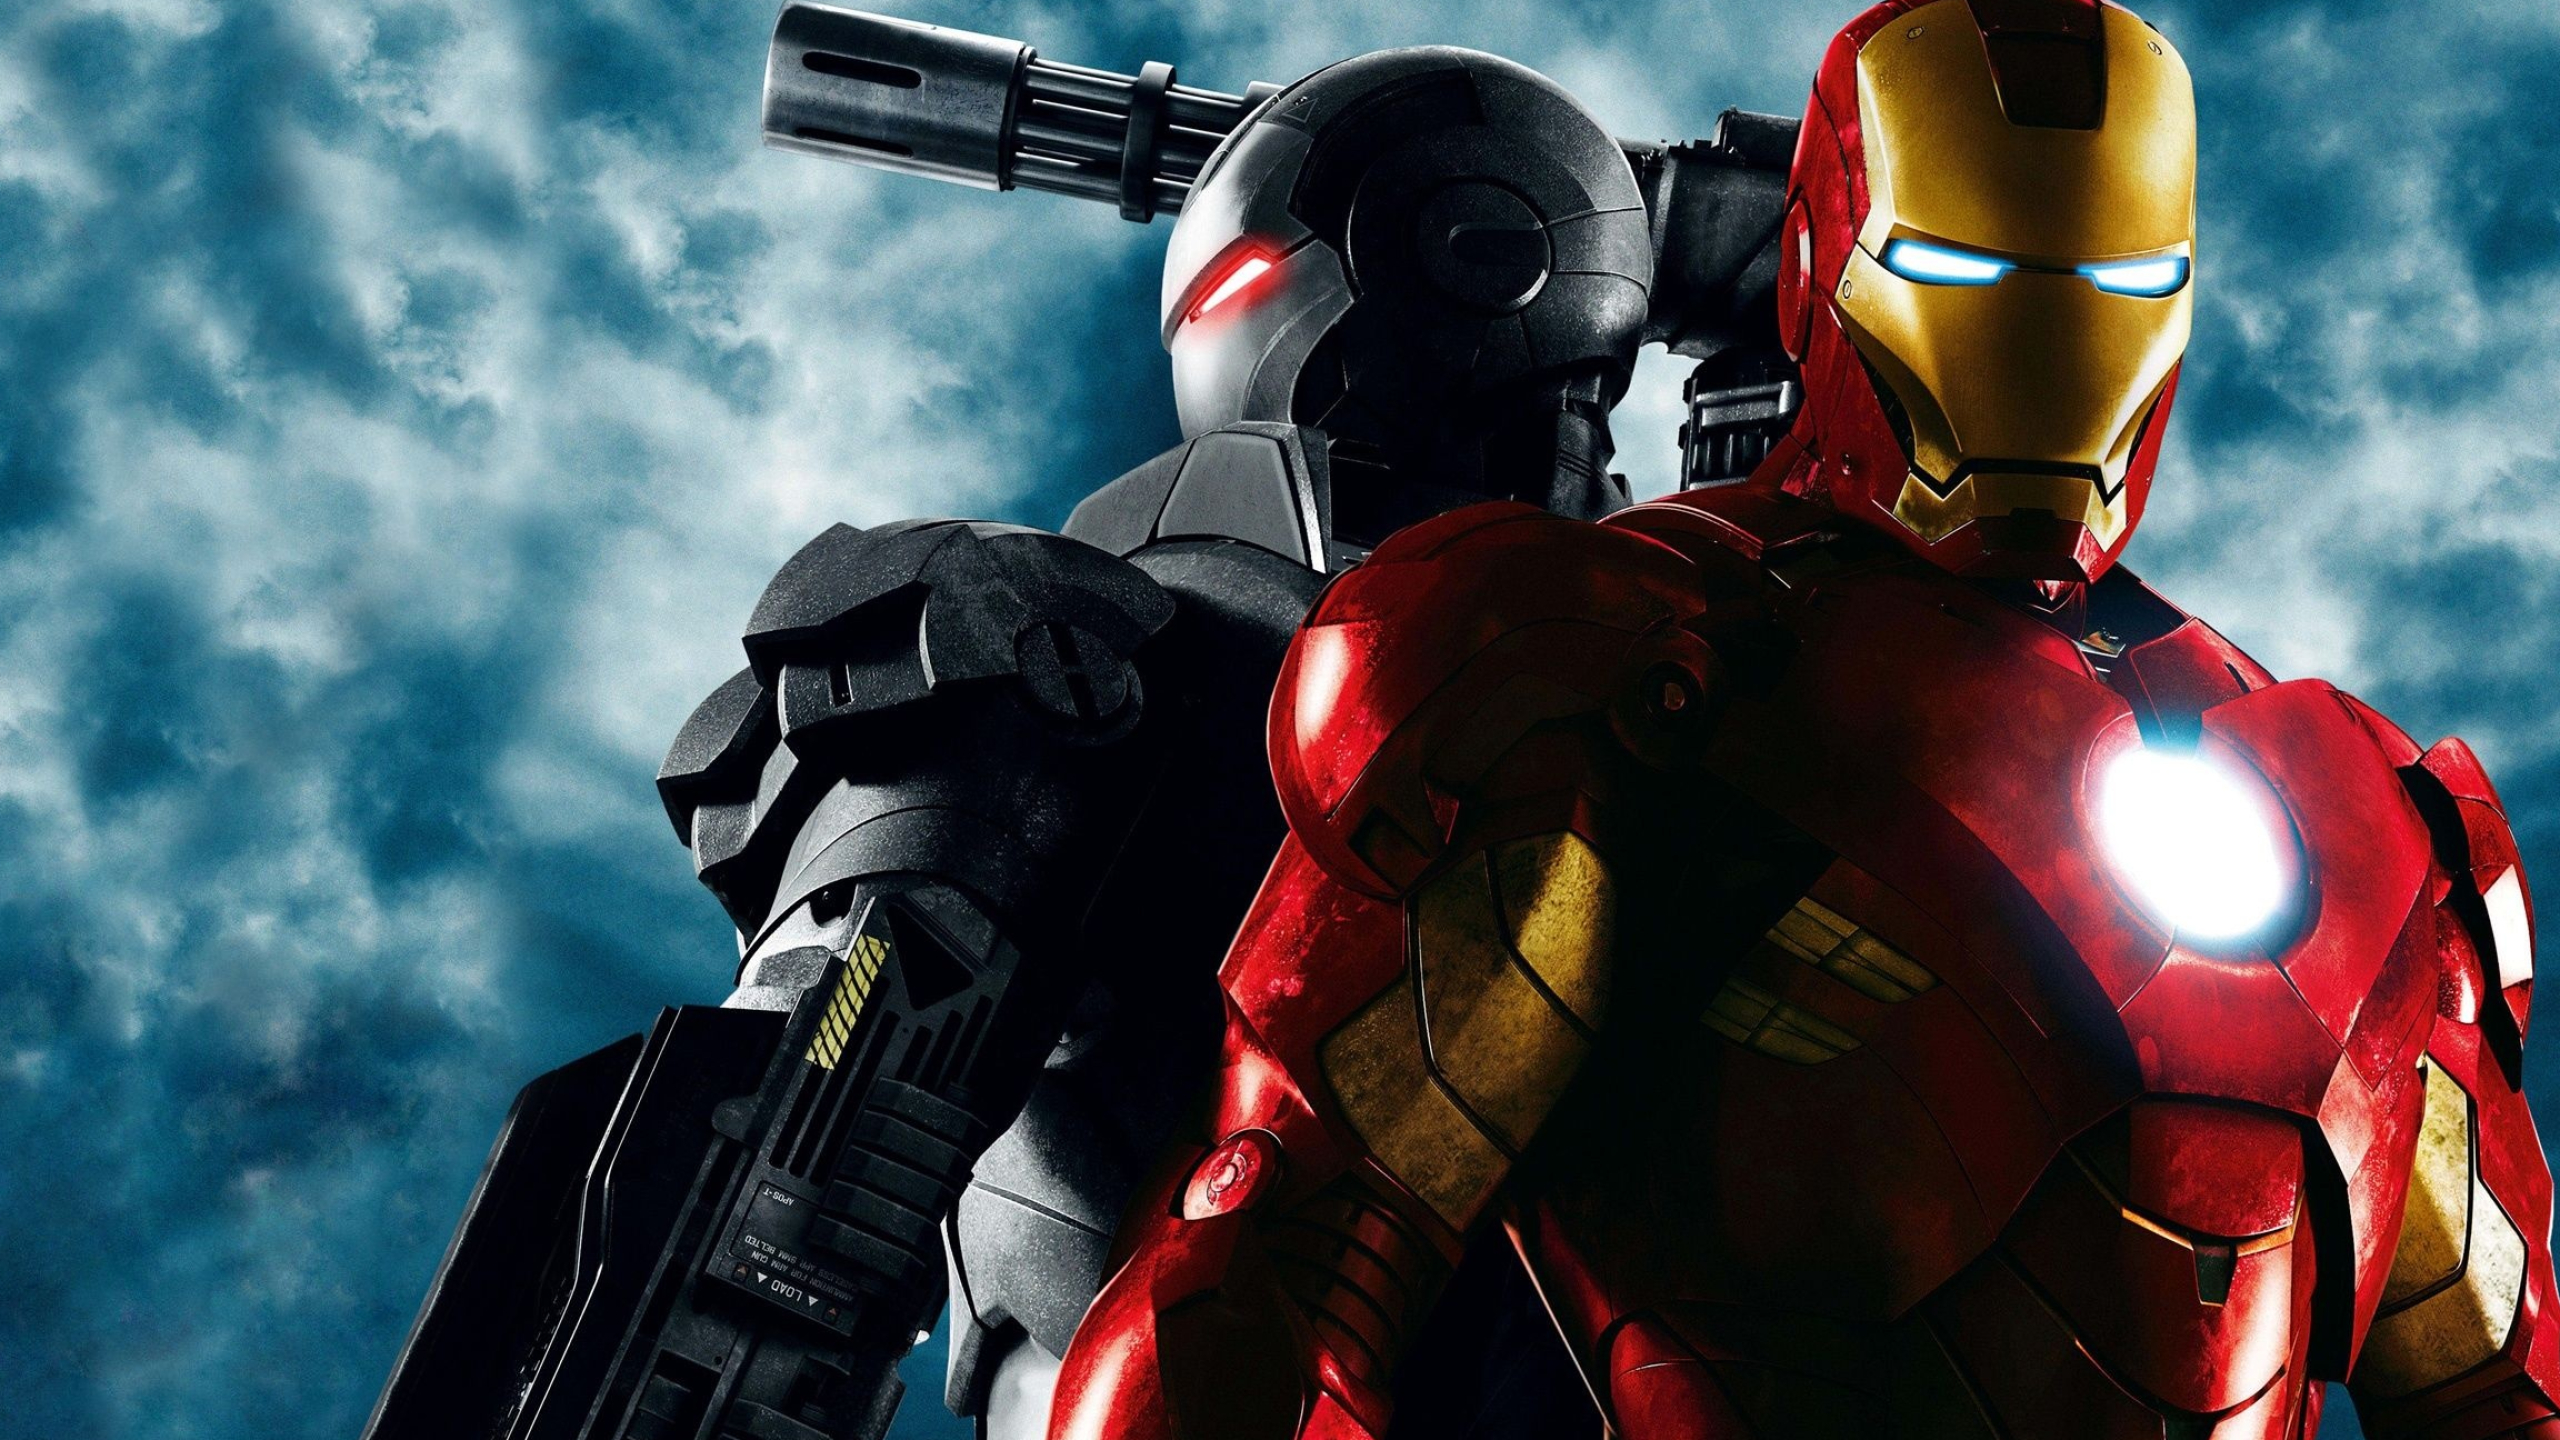 Iron Man 2, Top wallpapers, Powerful characters, Movie backgrounds, 2560x1440 HD Desktop